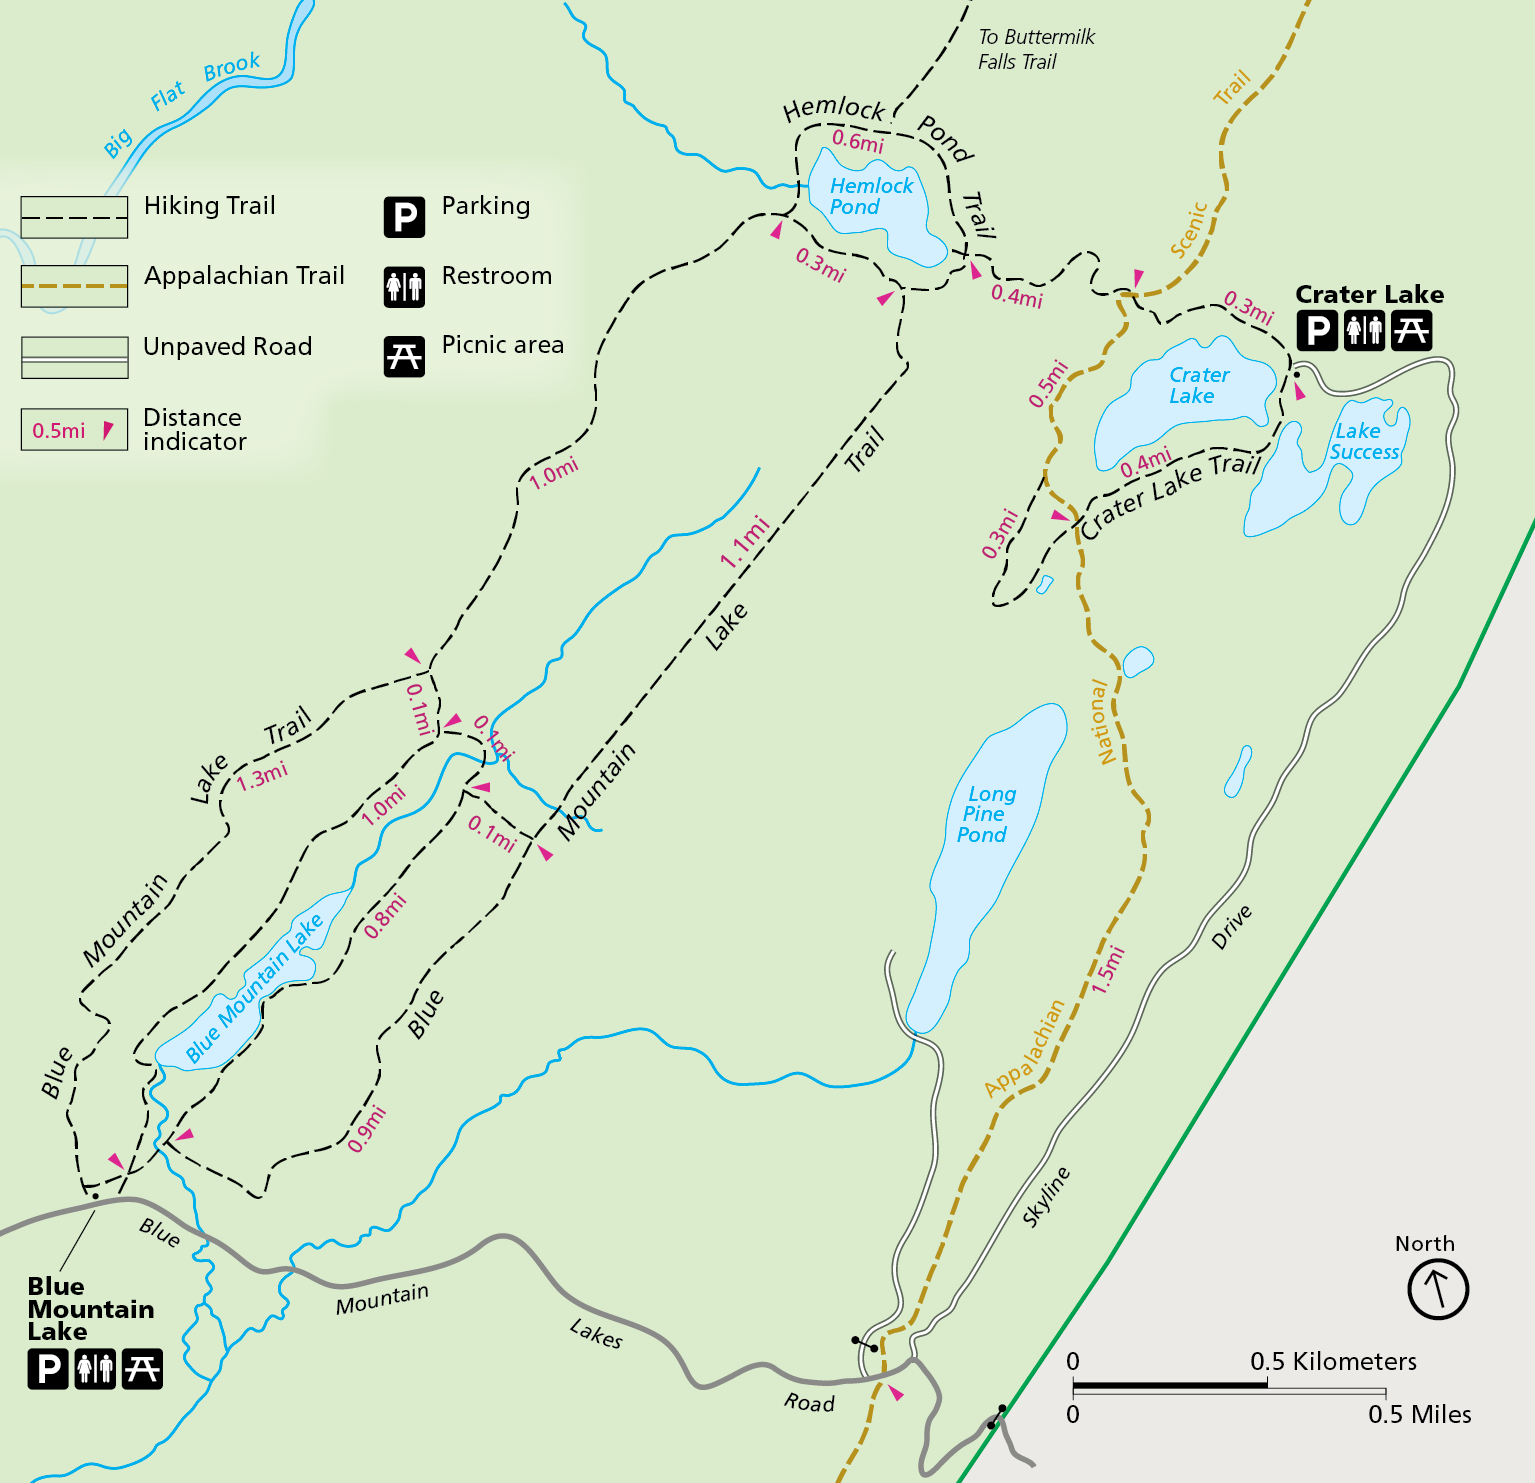 A map of the trails near Blue Mountain Lakes, NJ.